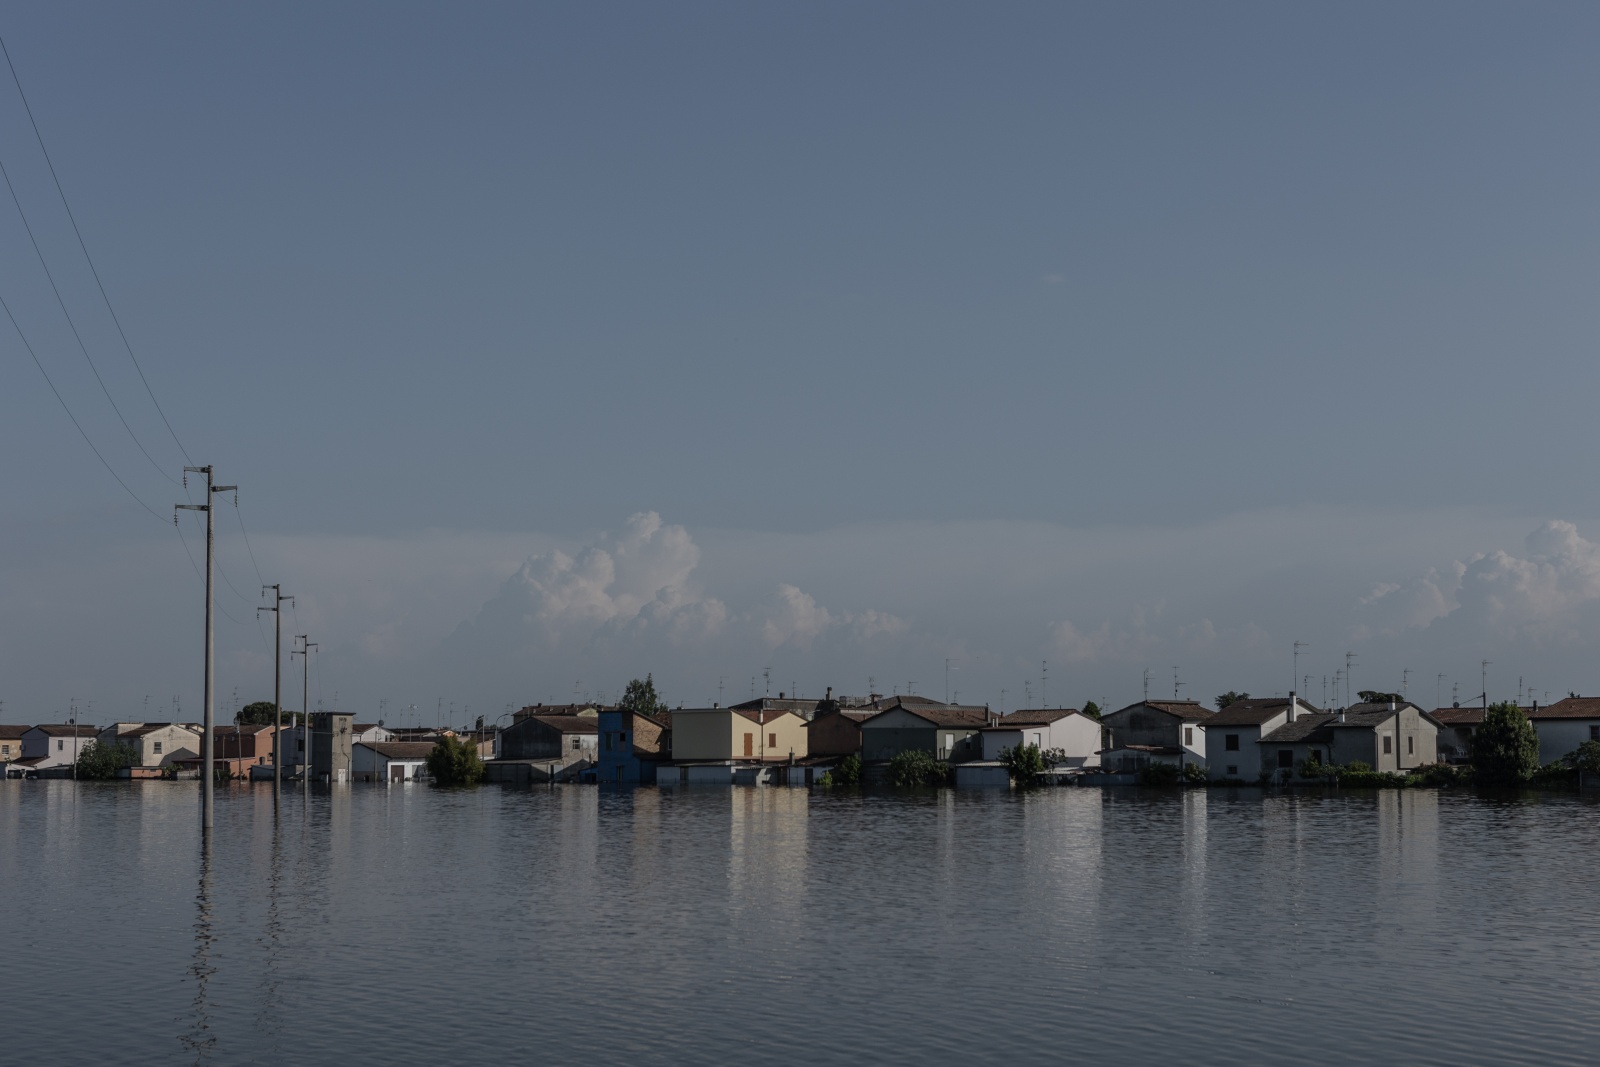 CONSELICE, ITALY – MAY 23: 
The recent flood seriously affected the city and days later it is the only area still under water in Conselice, Emilia Romagna on May 23, 2023 .